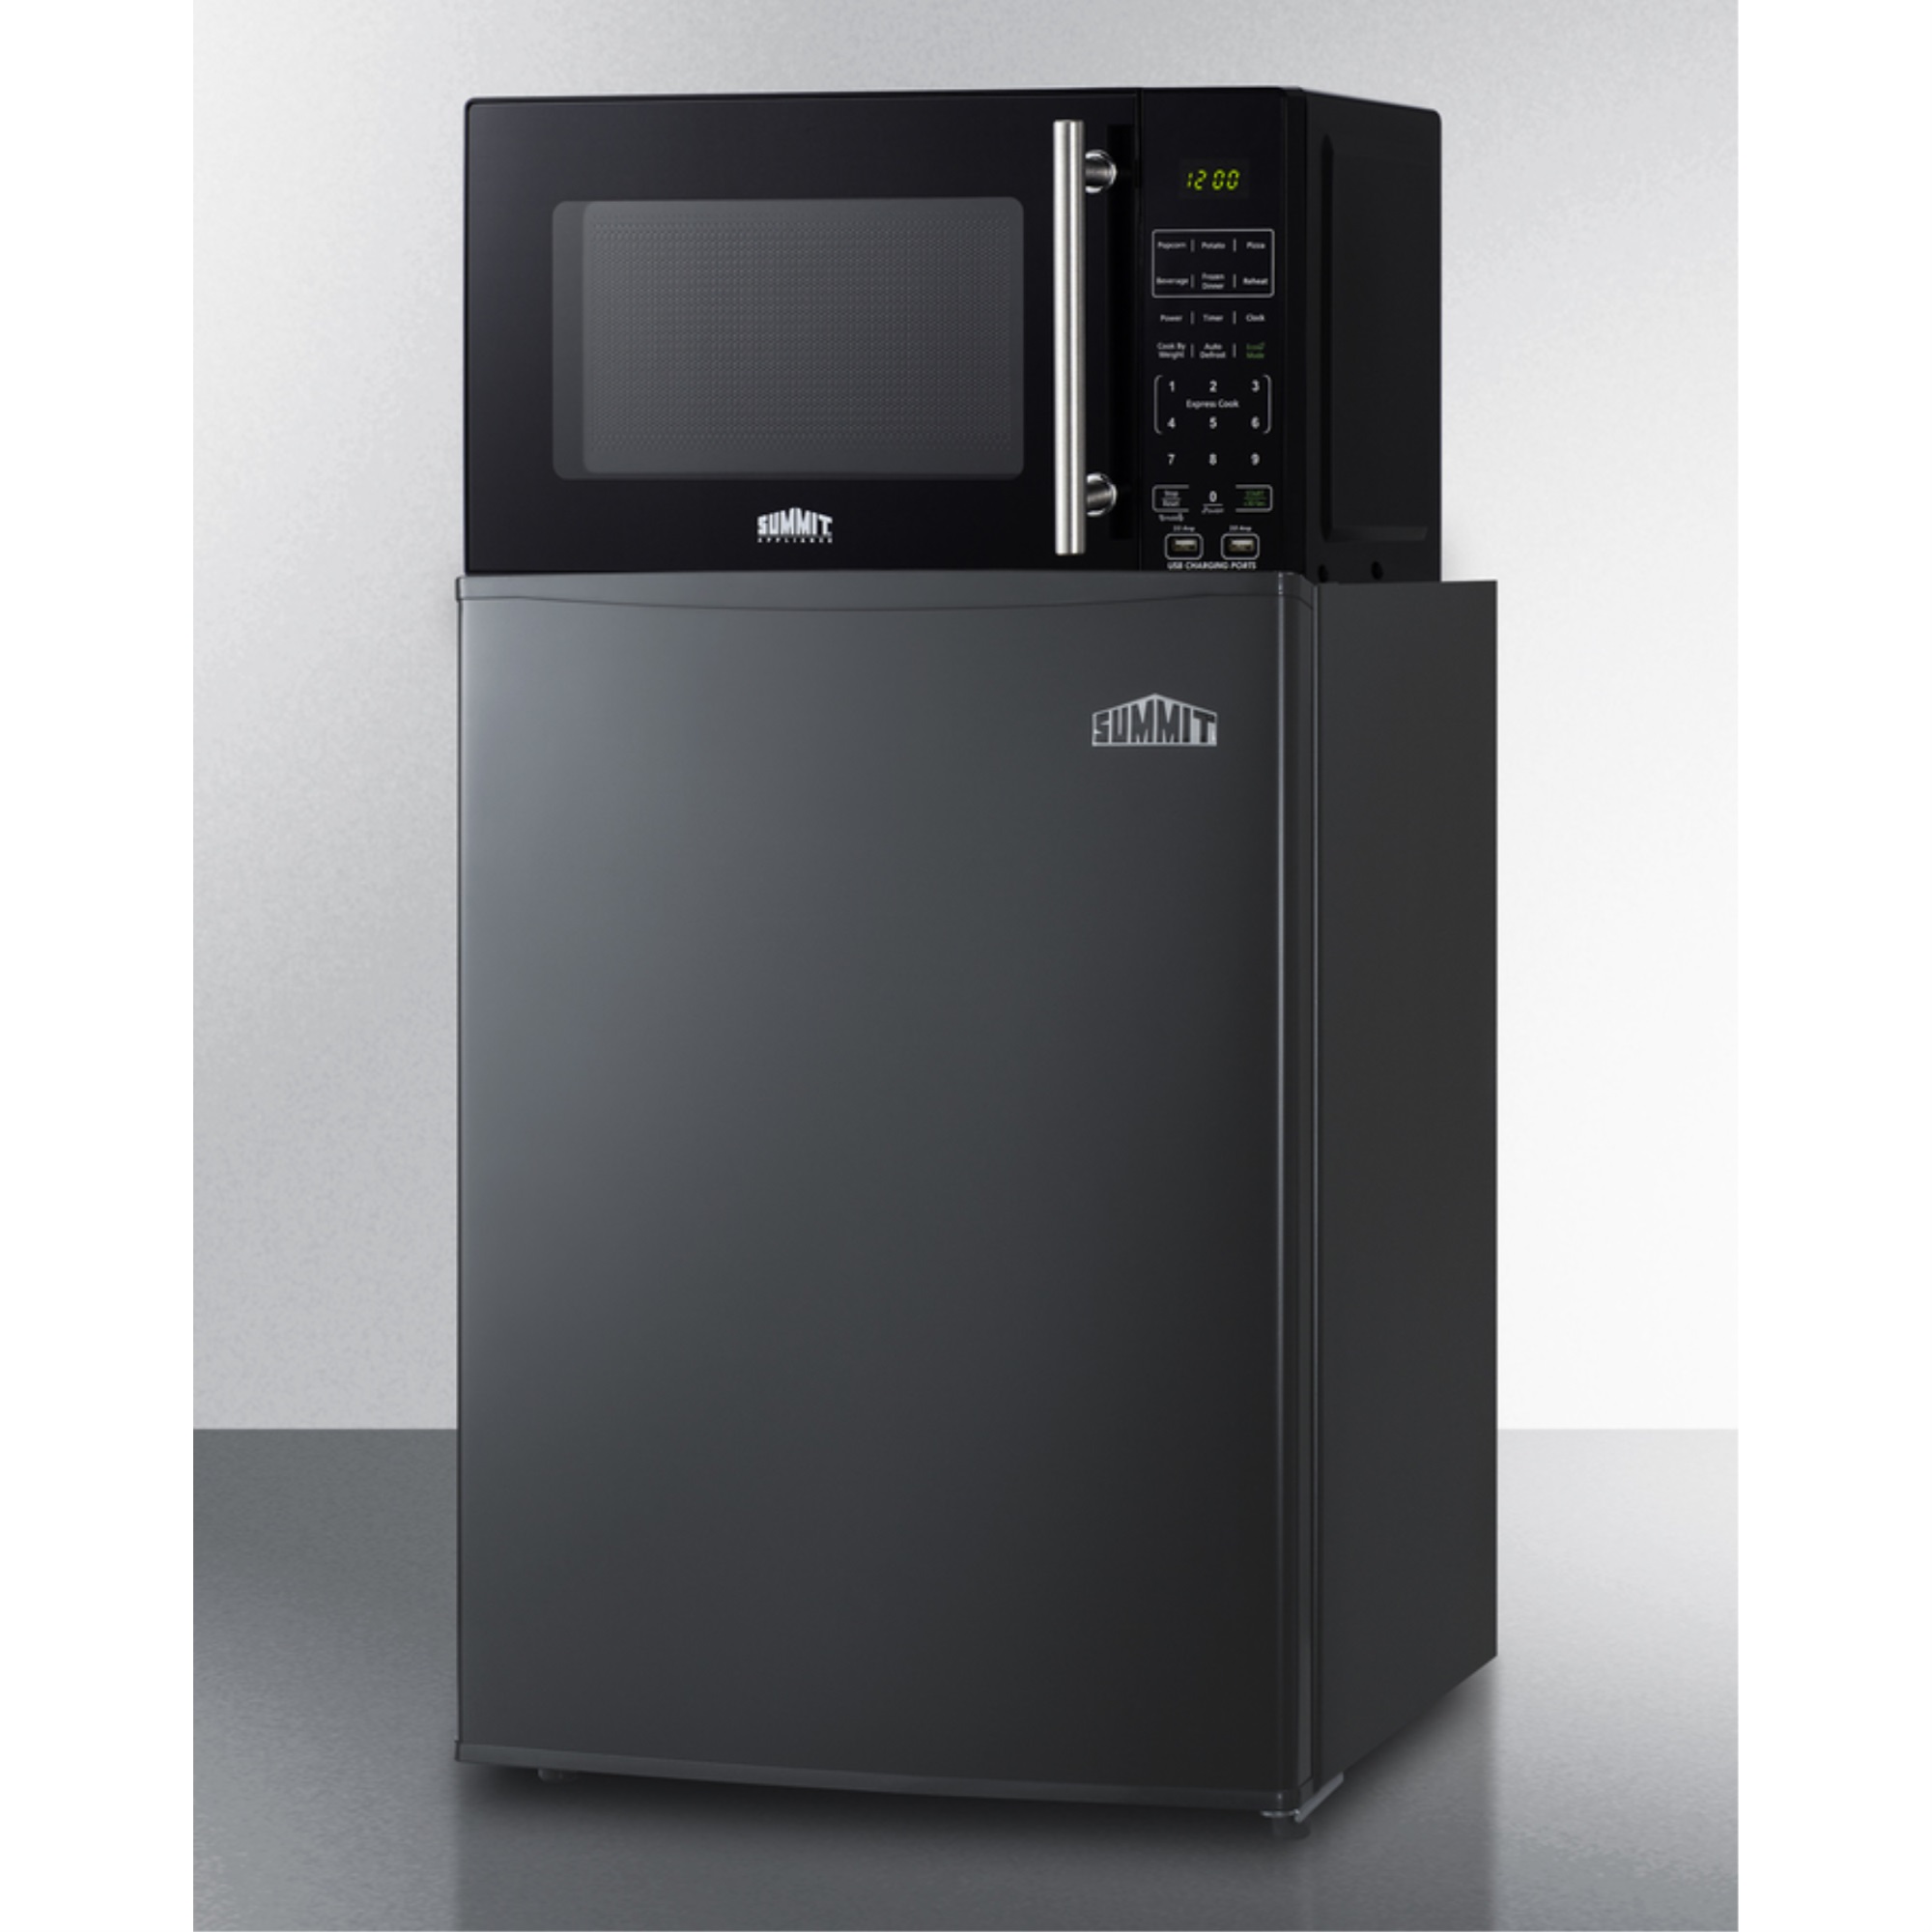 Summit Compact all-refrigerator in black and microwave with built-in allocator, with brackets included (ships in 3 boxes on one palle